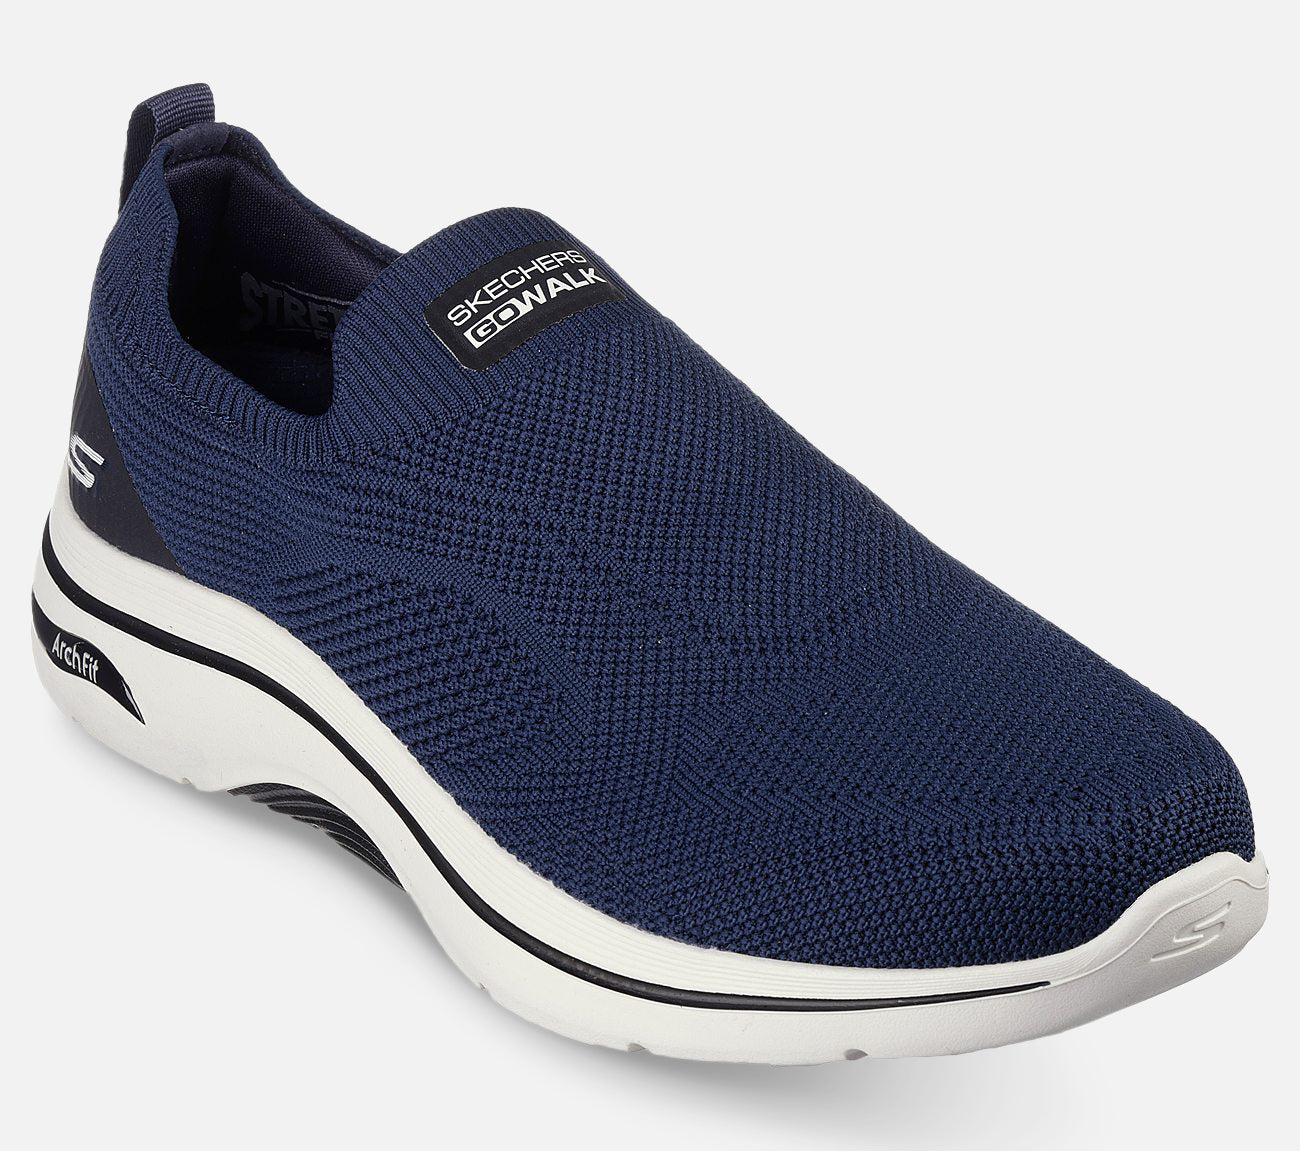 GO WALK Arch Fit 2.0 - Knitted Relief Shoe Skechers